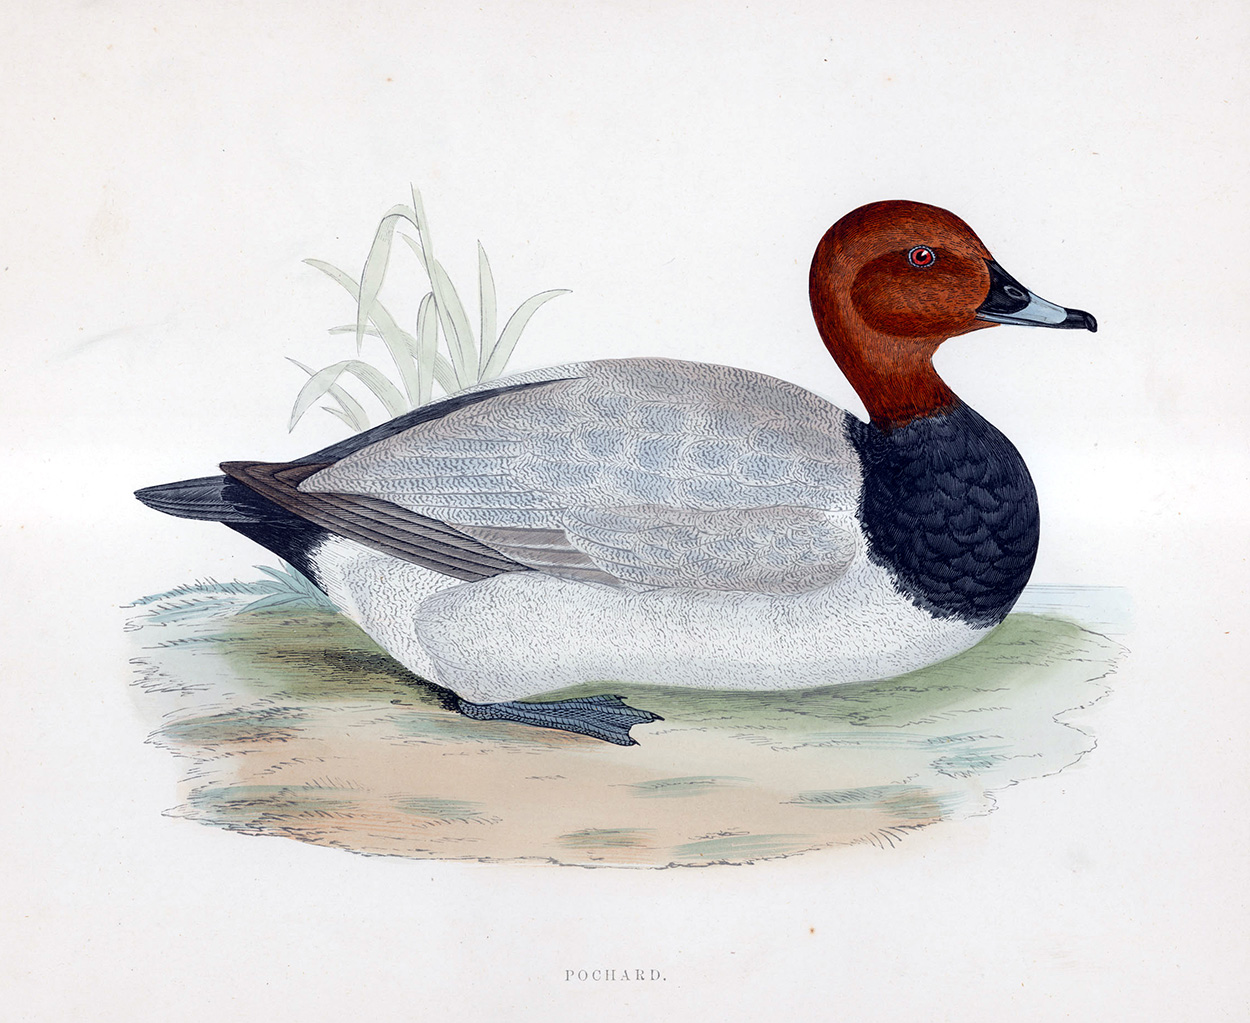 Pochard - hand coloured lithograph 1891 (Print) art by Beverley R Morris Art at The Illustration Art Gallery